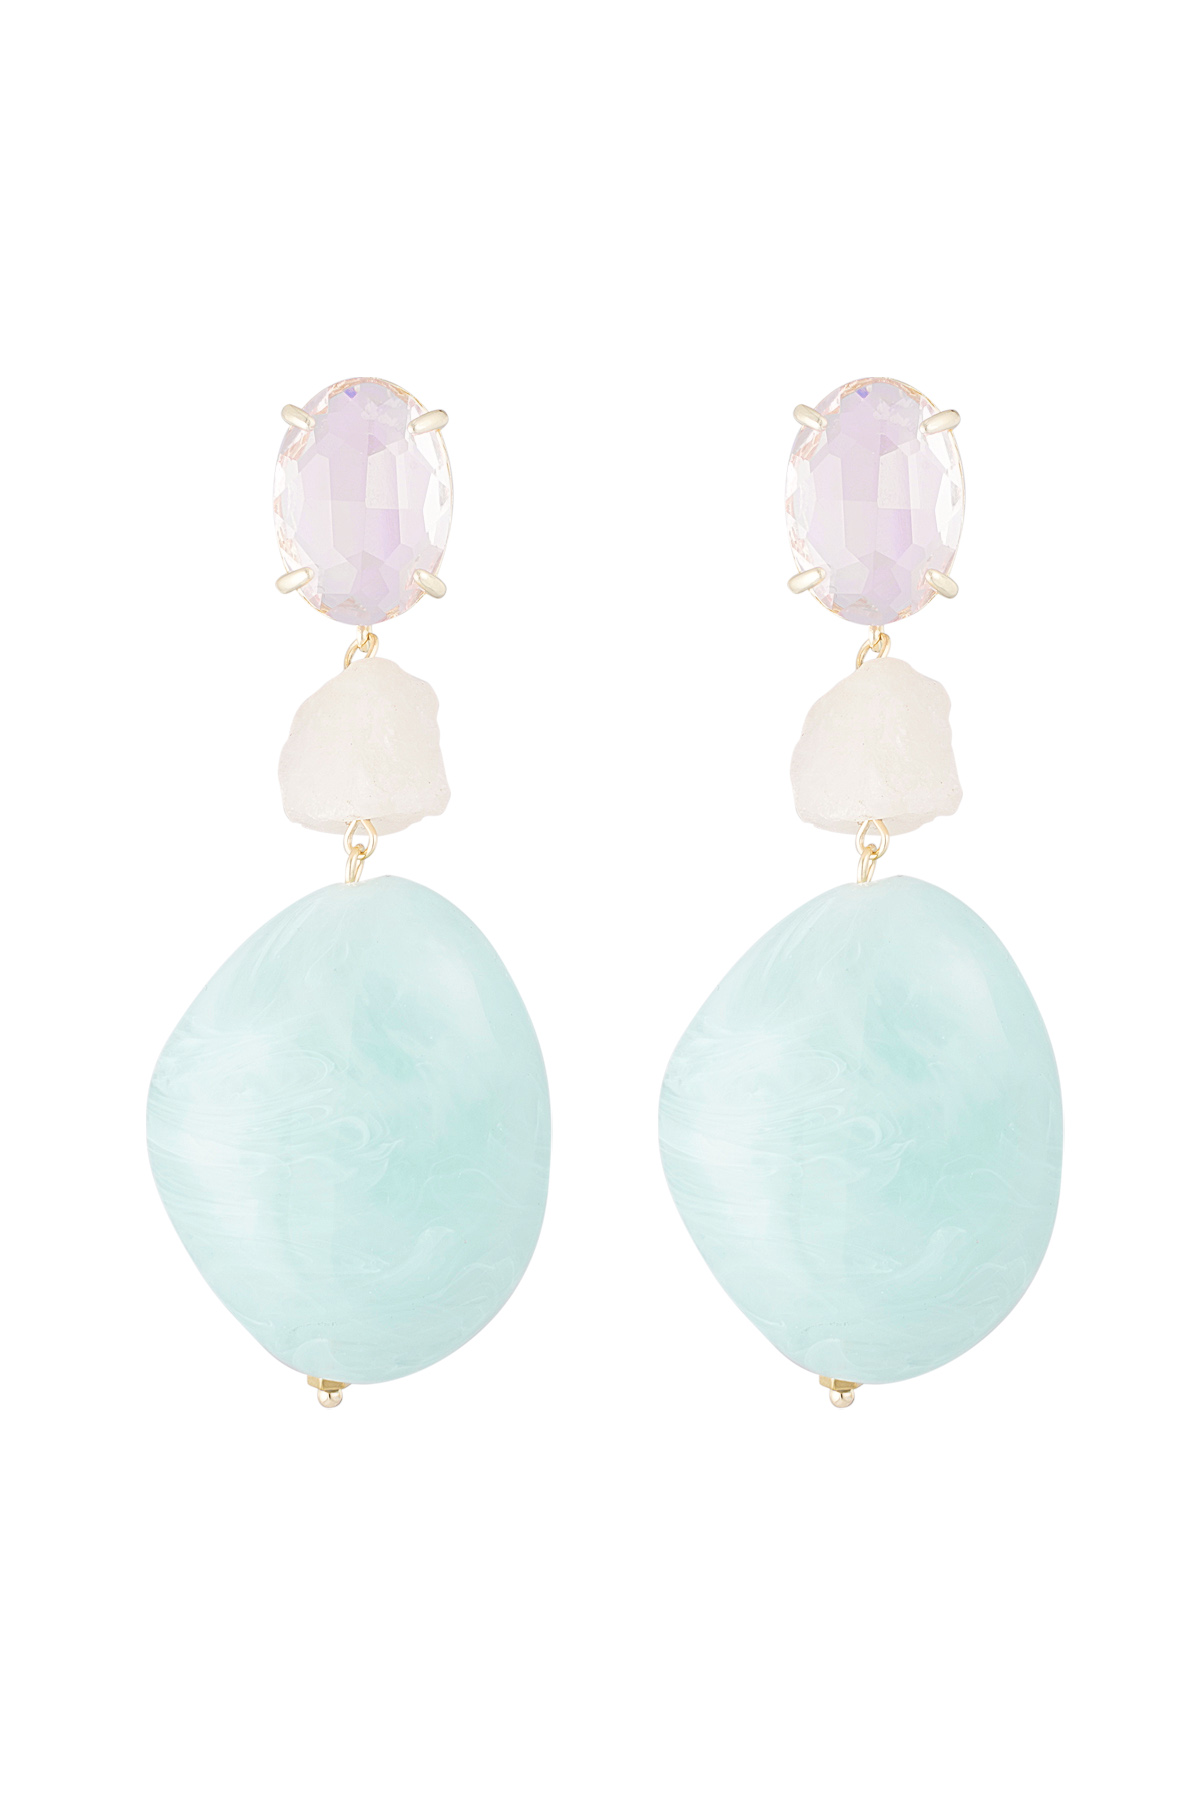 Statement glass earrings - blue/pink  h5 